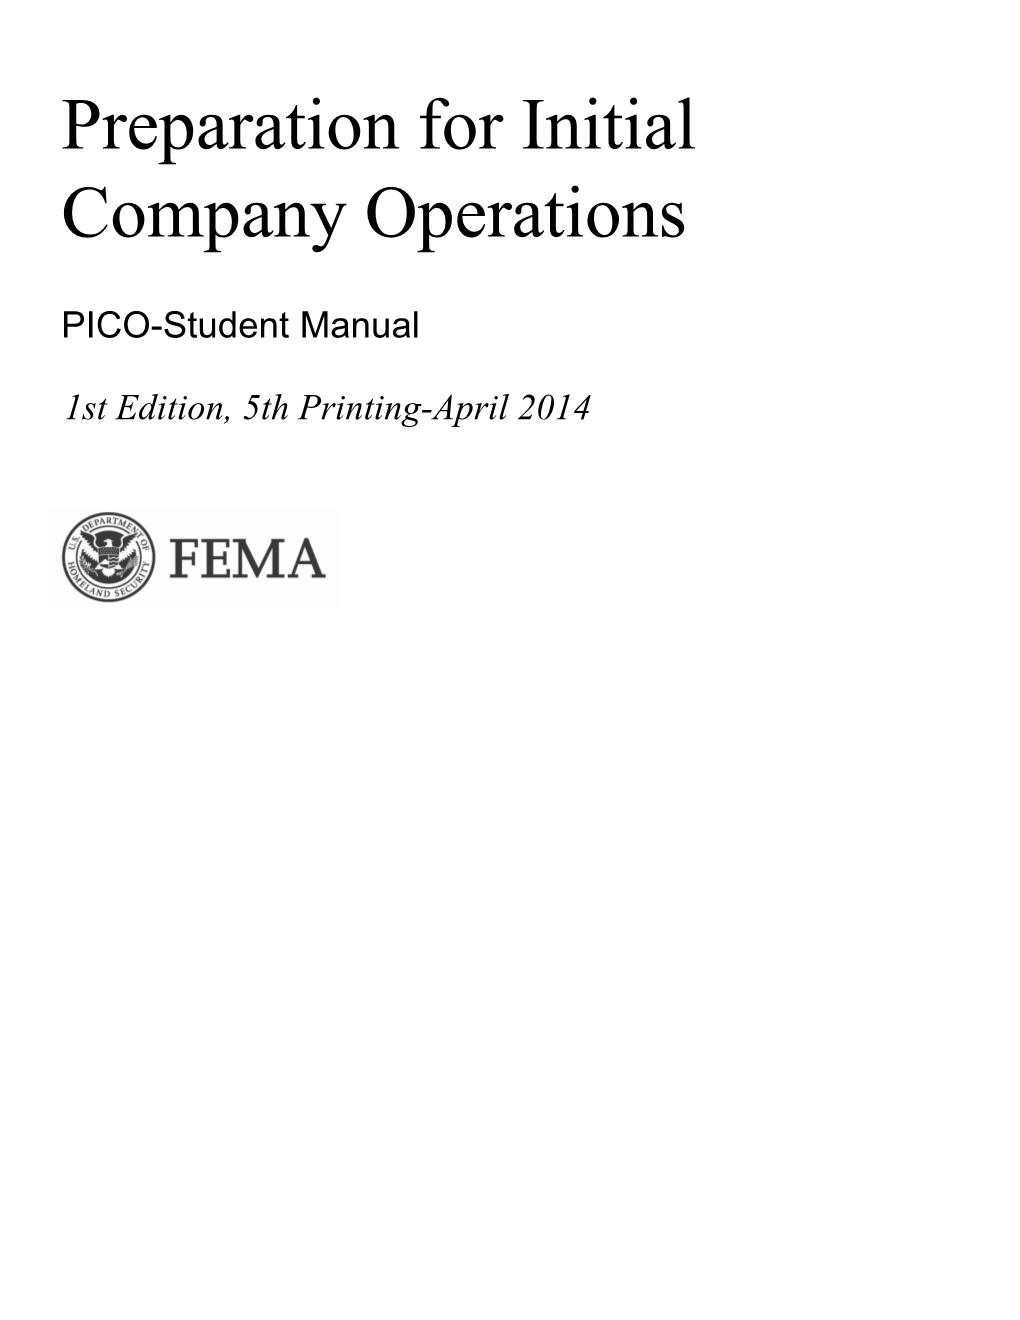 Preparation for Initial Company Operations-Student Manual